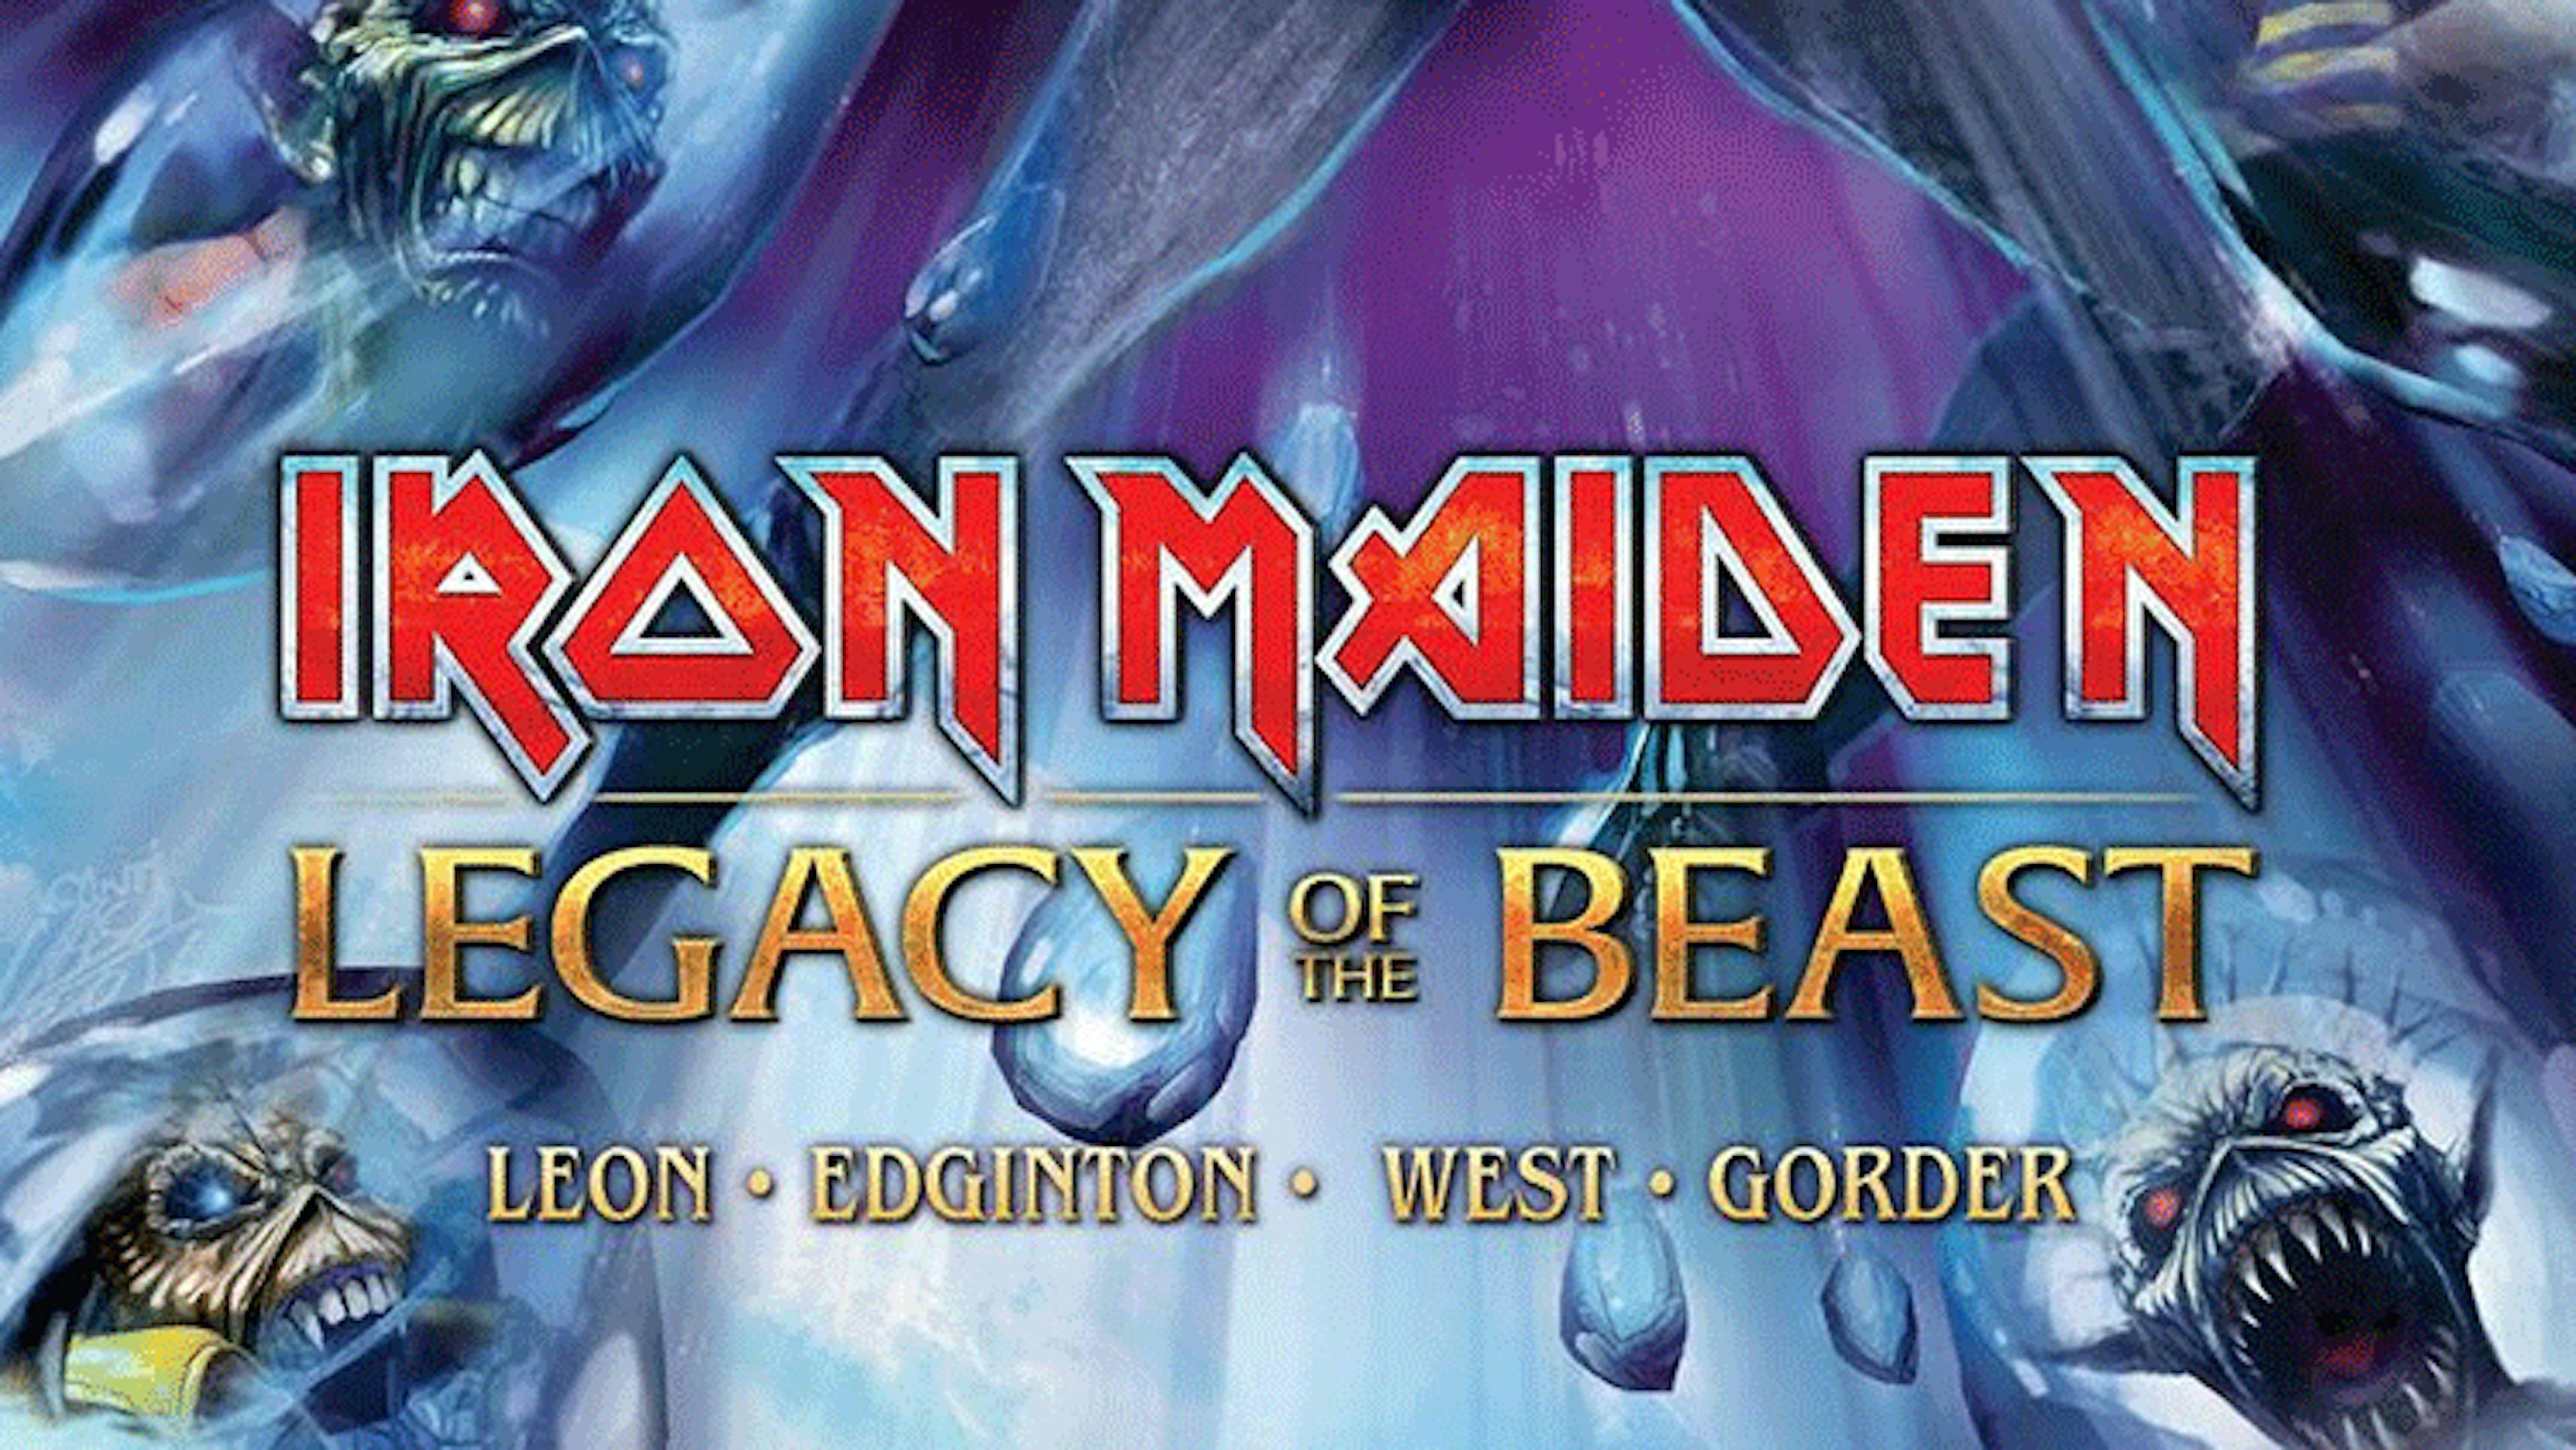 Iron Maiden Launch Legacy Of The Beast Comic Book Series